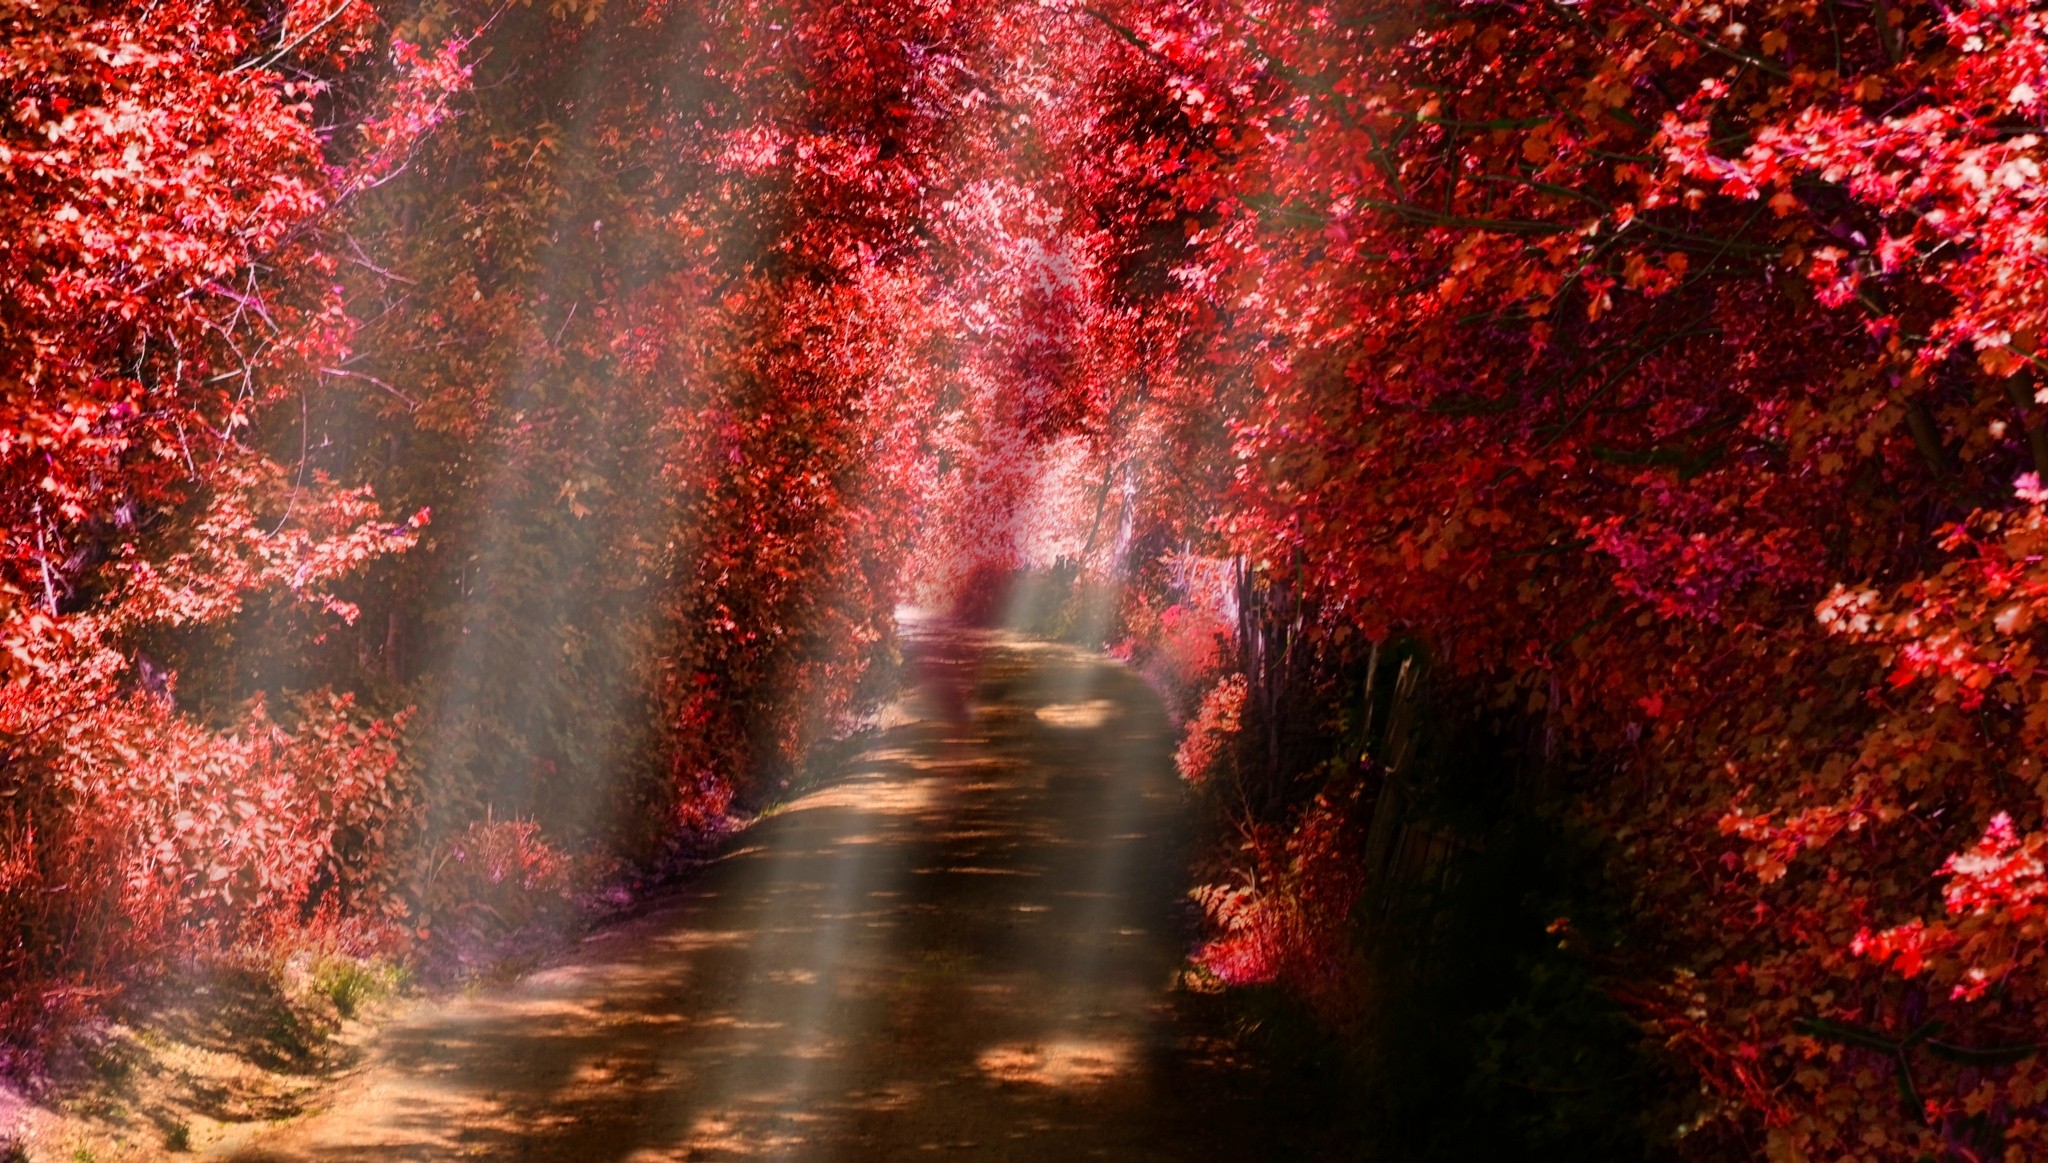 General 2048x1163 nature sun rays path fall red leaves shrubs trees mist sunlight dirt road